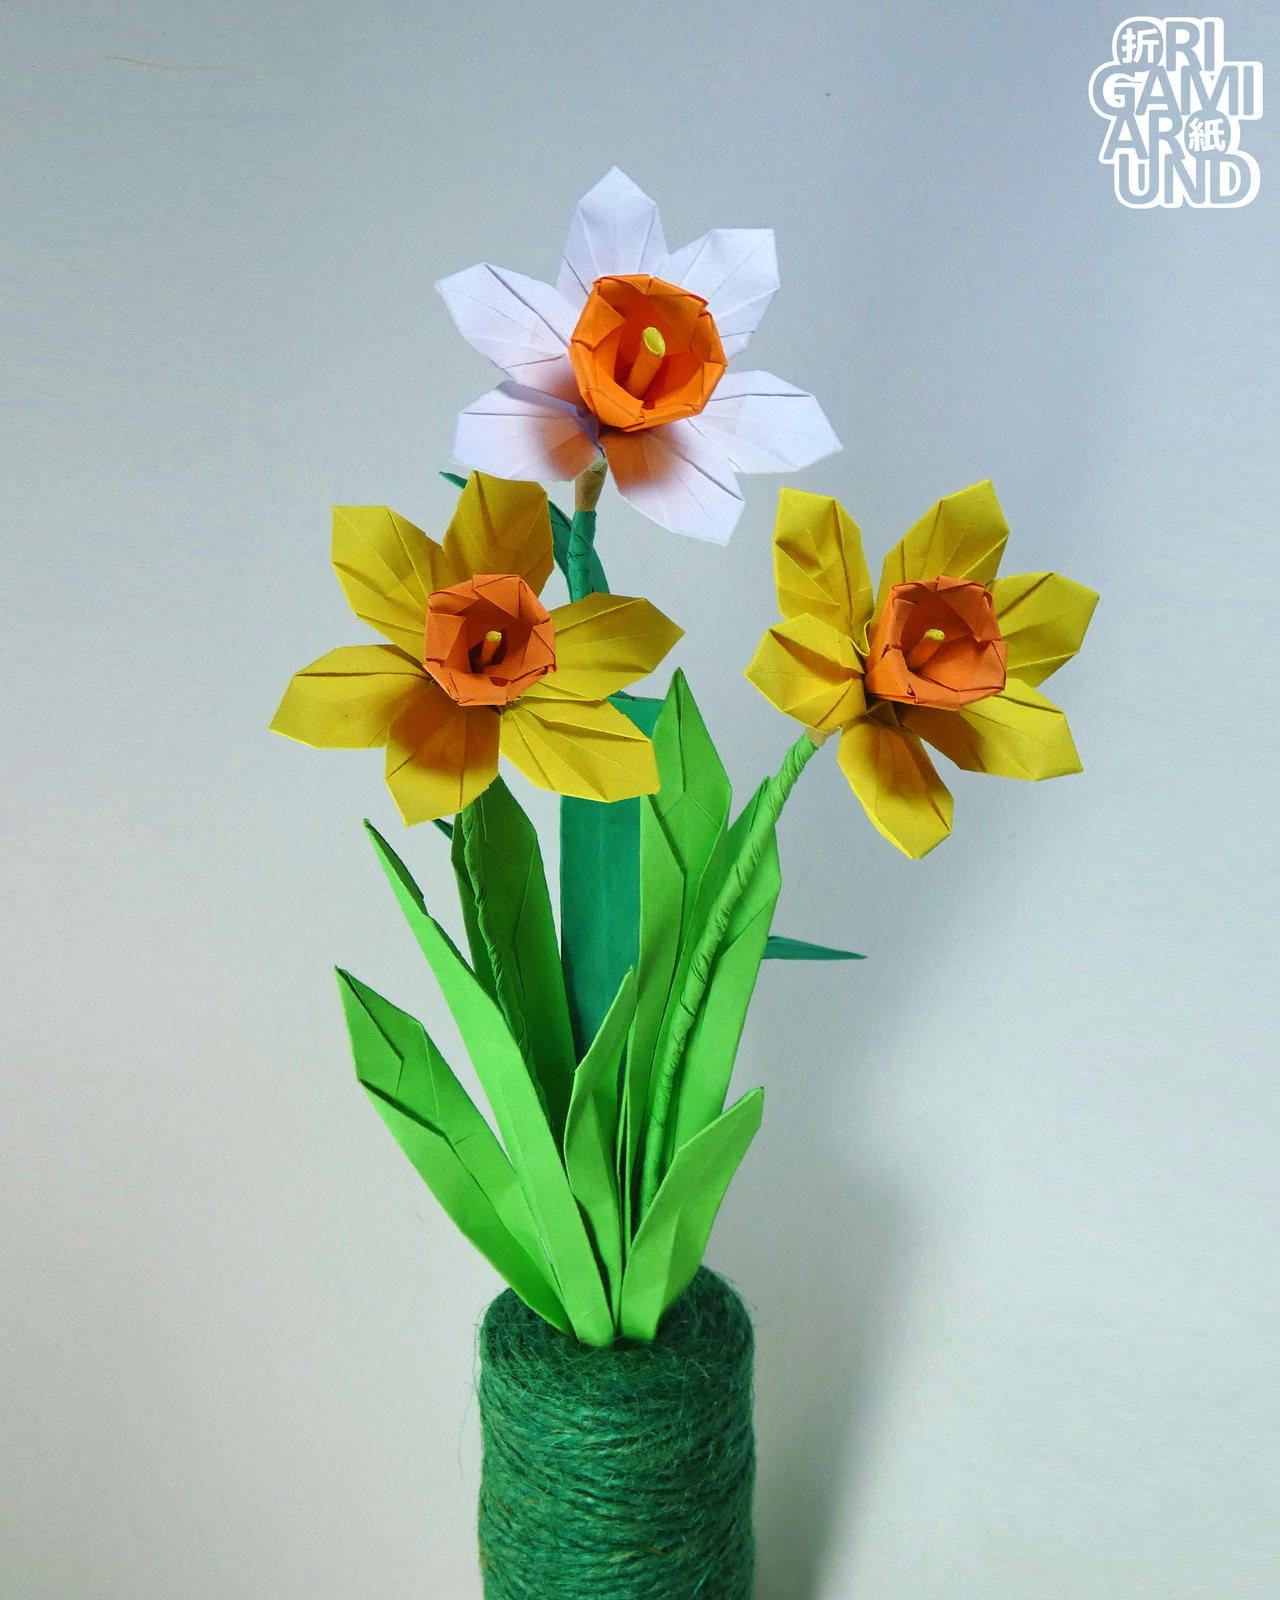 Origami/papercraft daffodil/narcissus by OrigamiAround on DeviantArt